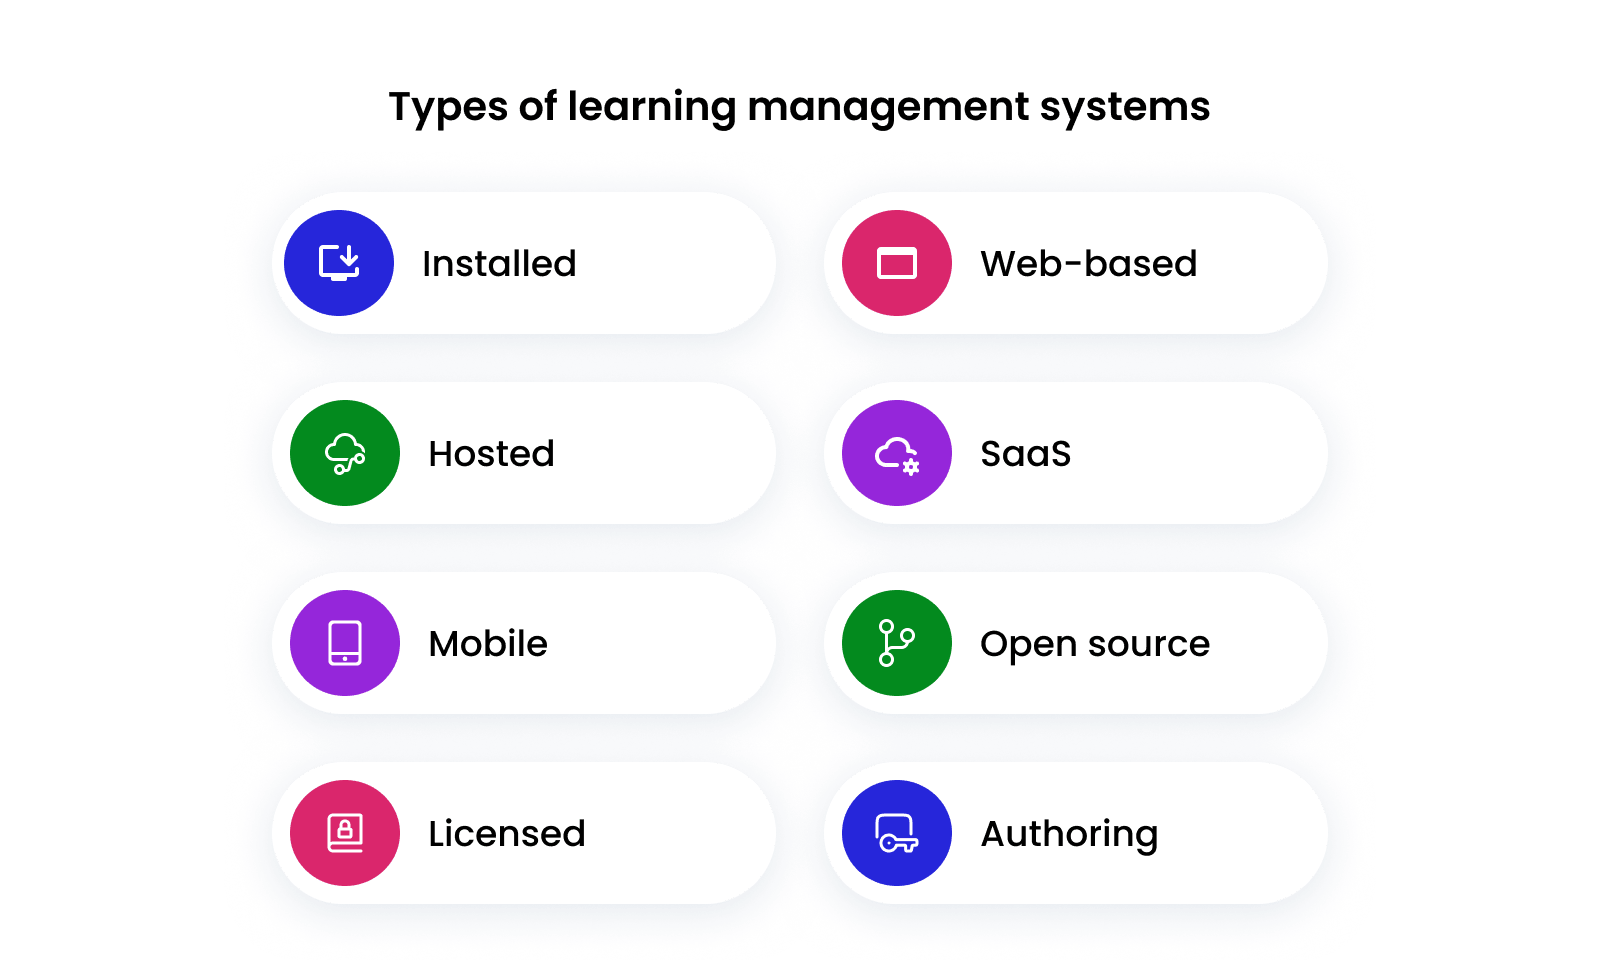 Types of learning management systems